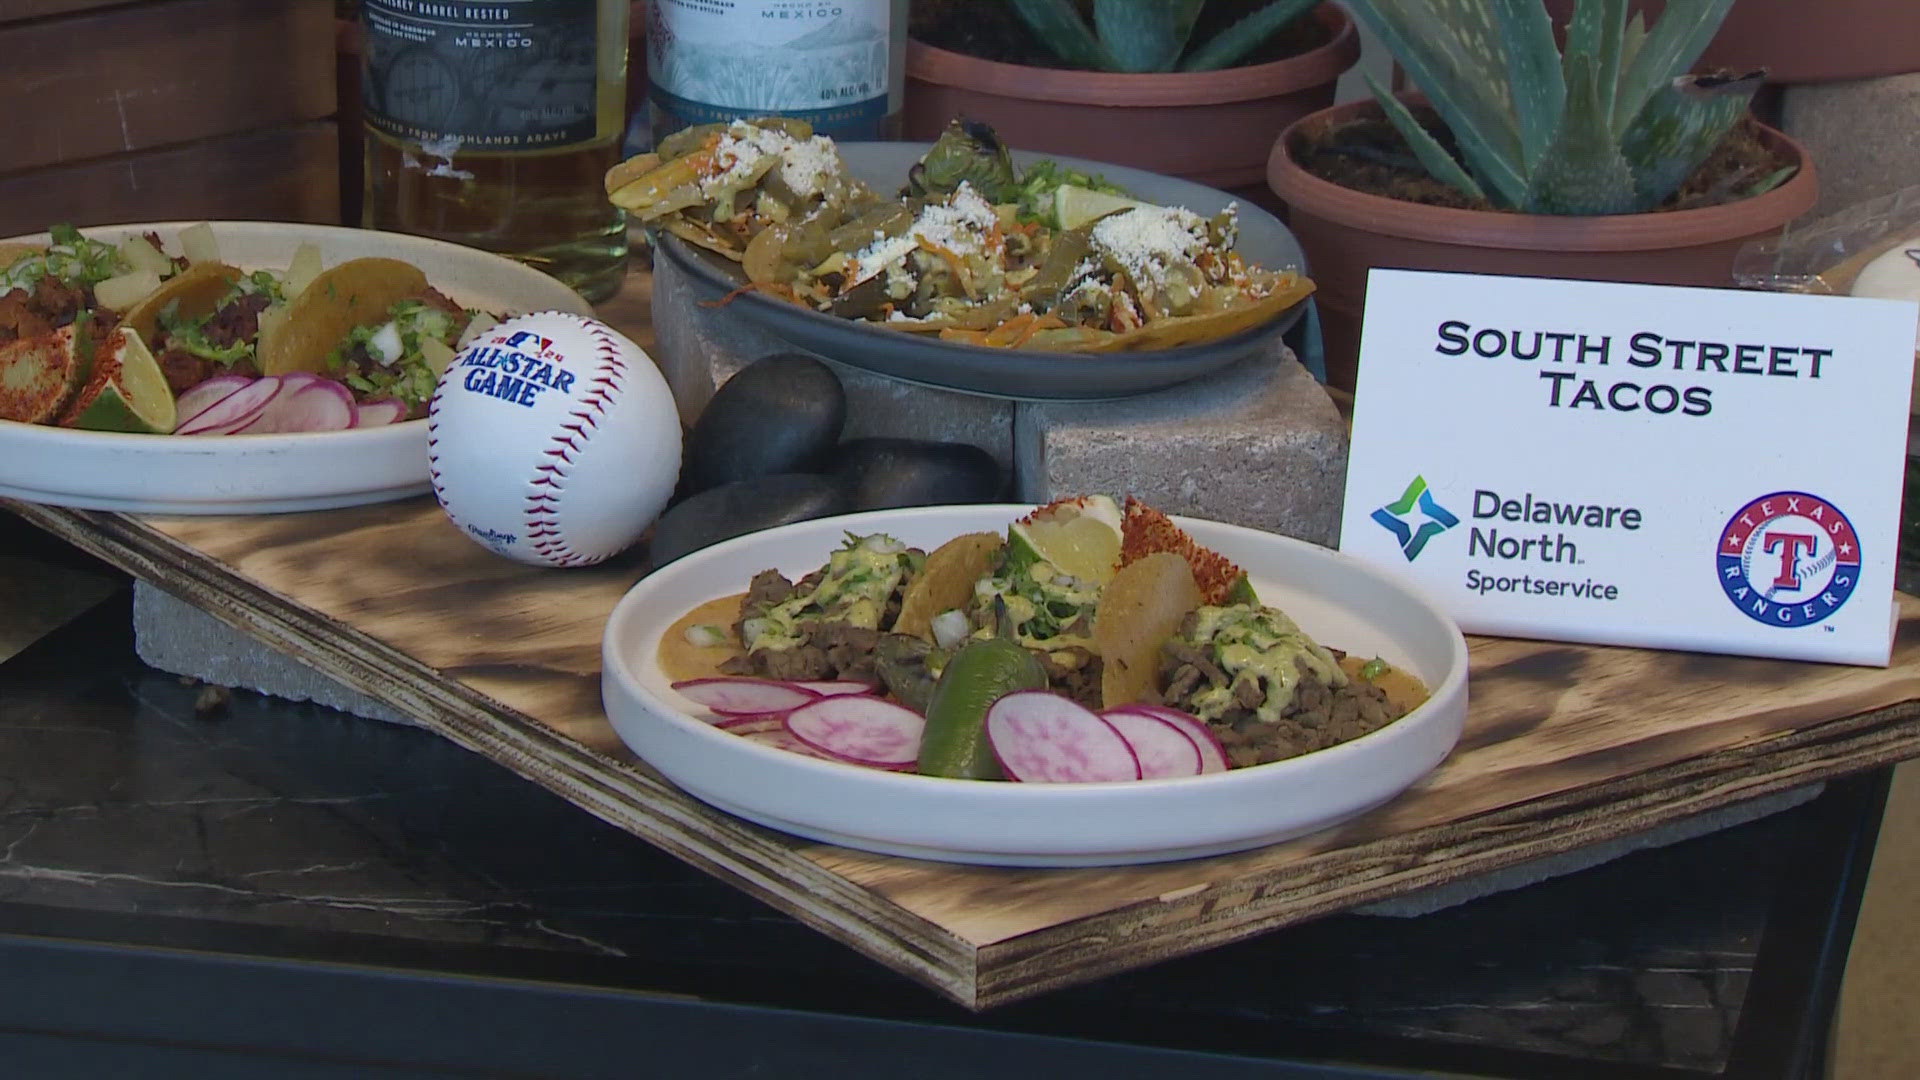 The menu includes street tacos, cheesesteak sandwiches and poke bowls.